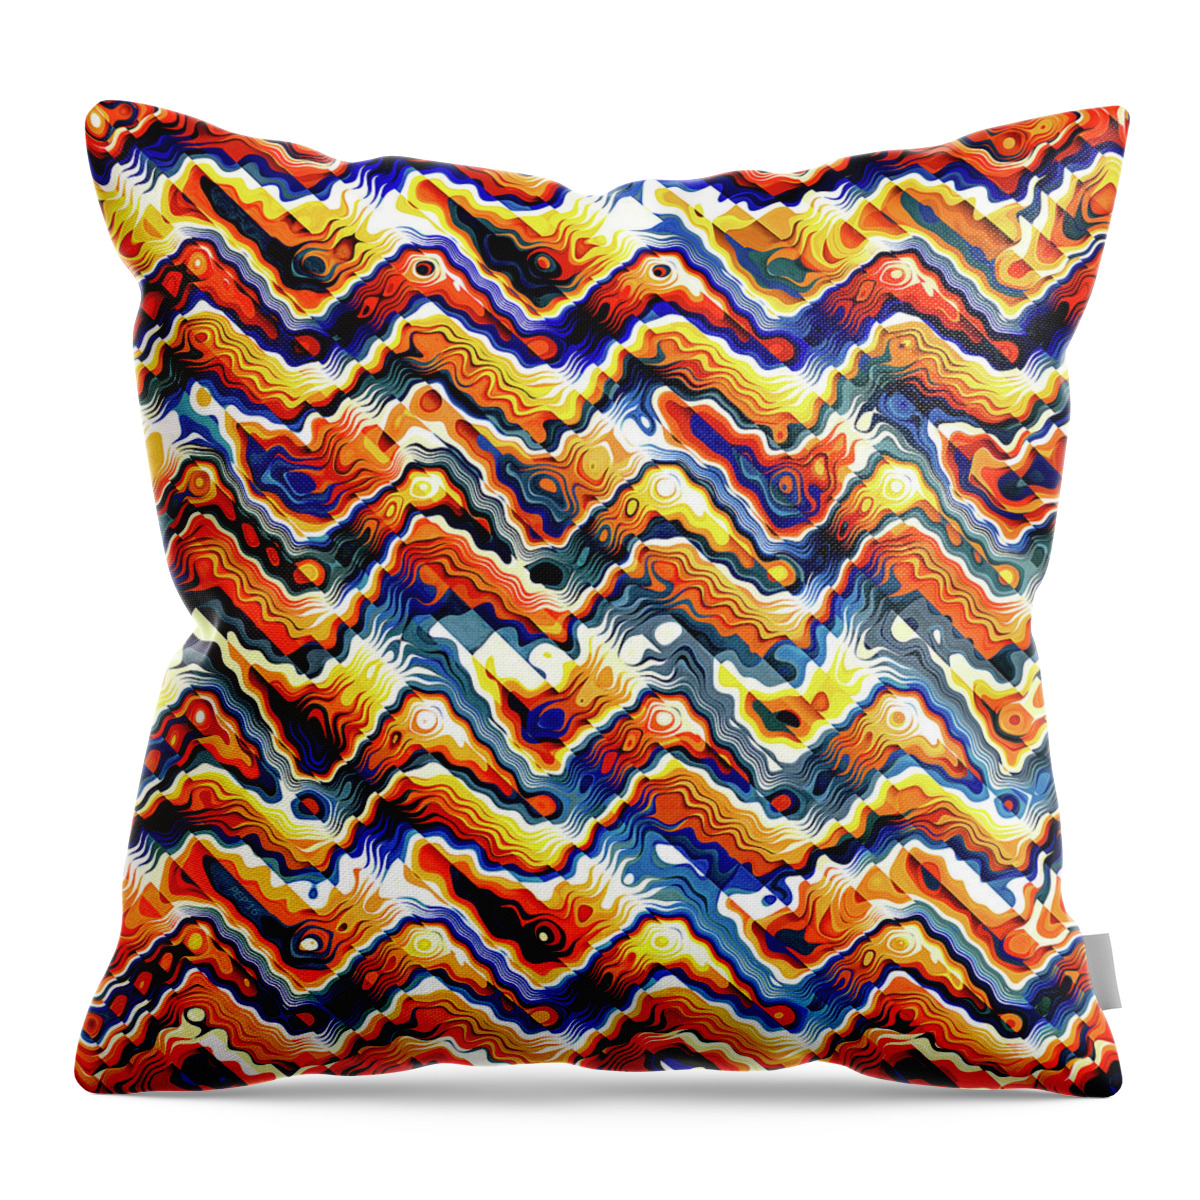 Geometry Throw Pillow featuring the digital art Vibrant Geometric Motif by Phil Perkins